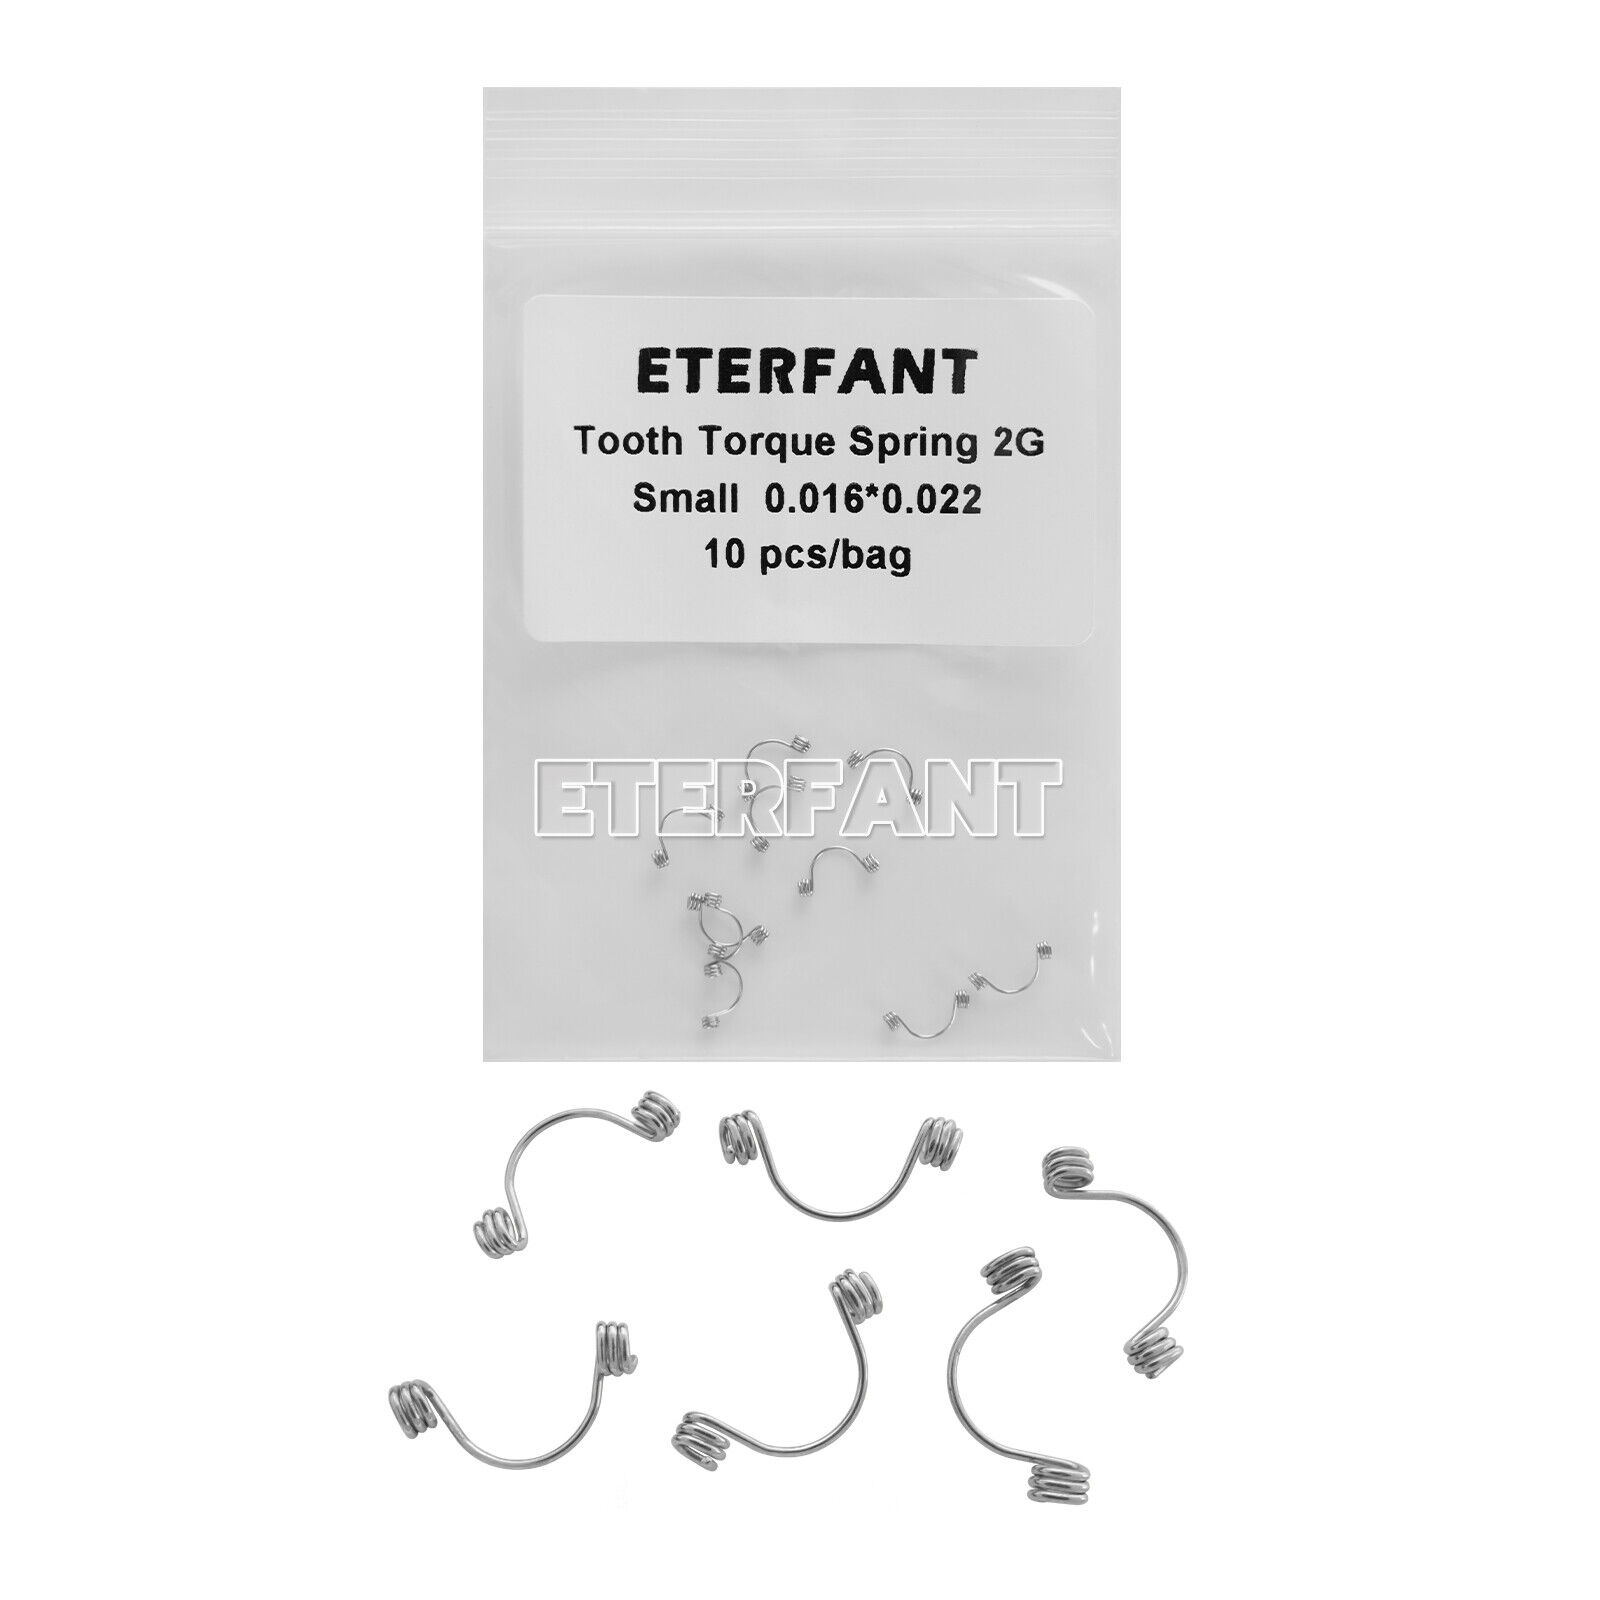 10PCs ETERFANT Dental Orthodontic Tooth Curved Torquing Springs Anterior Small